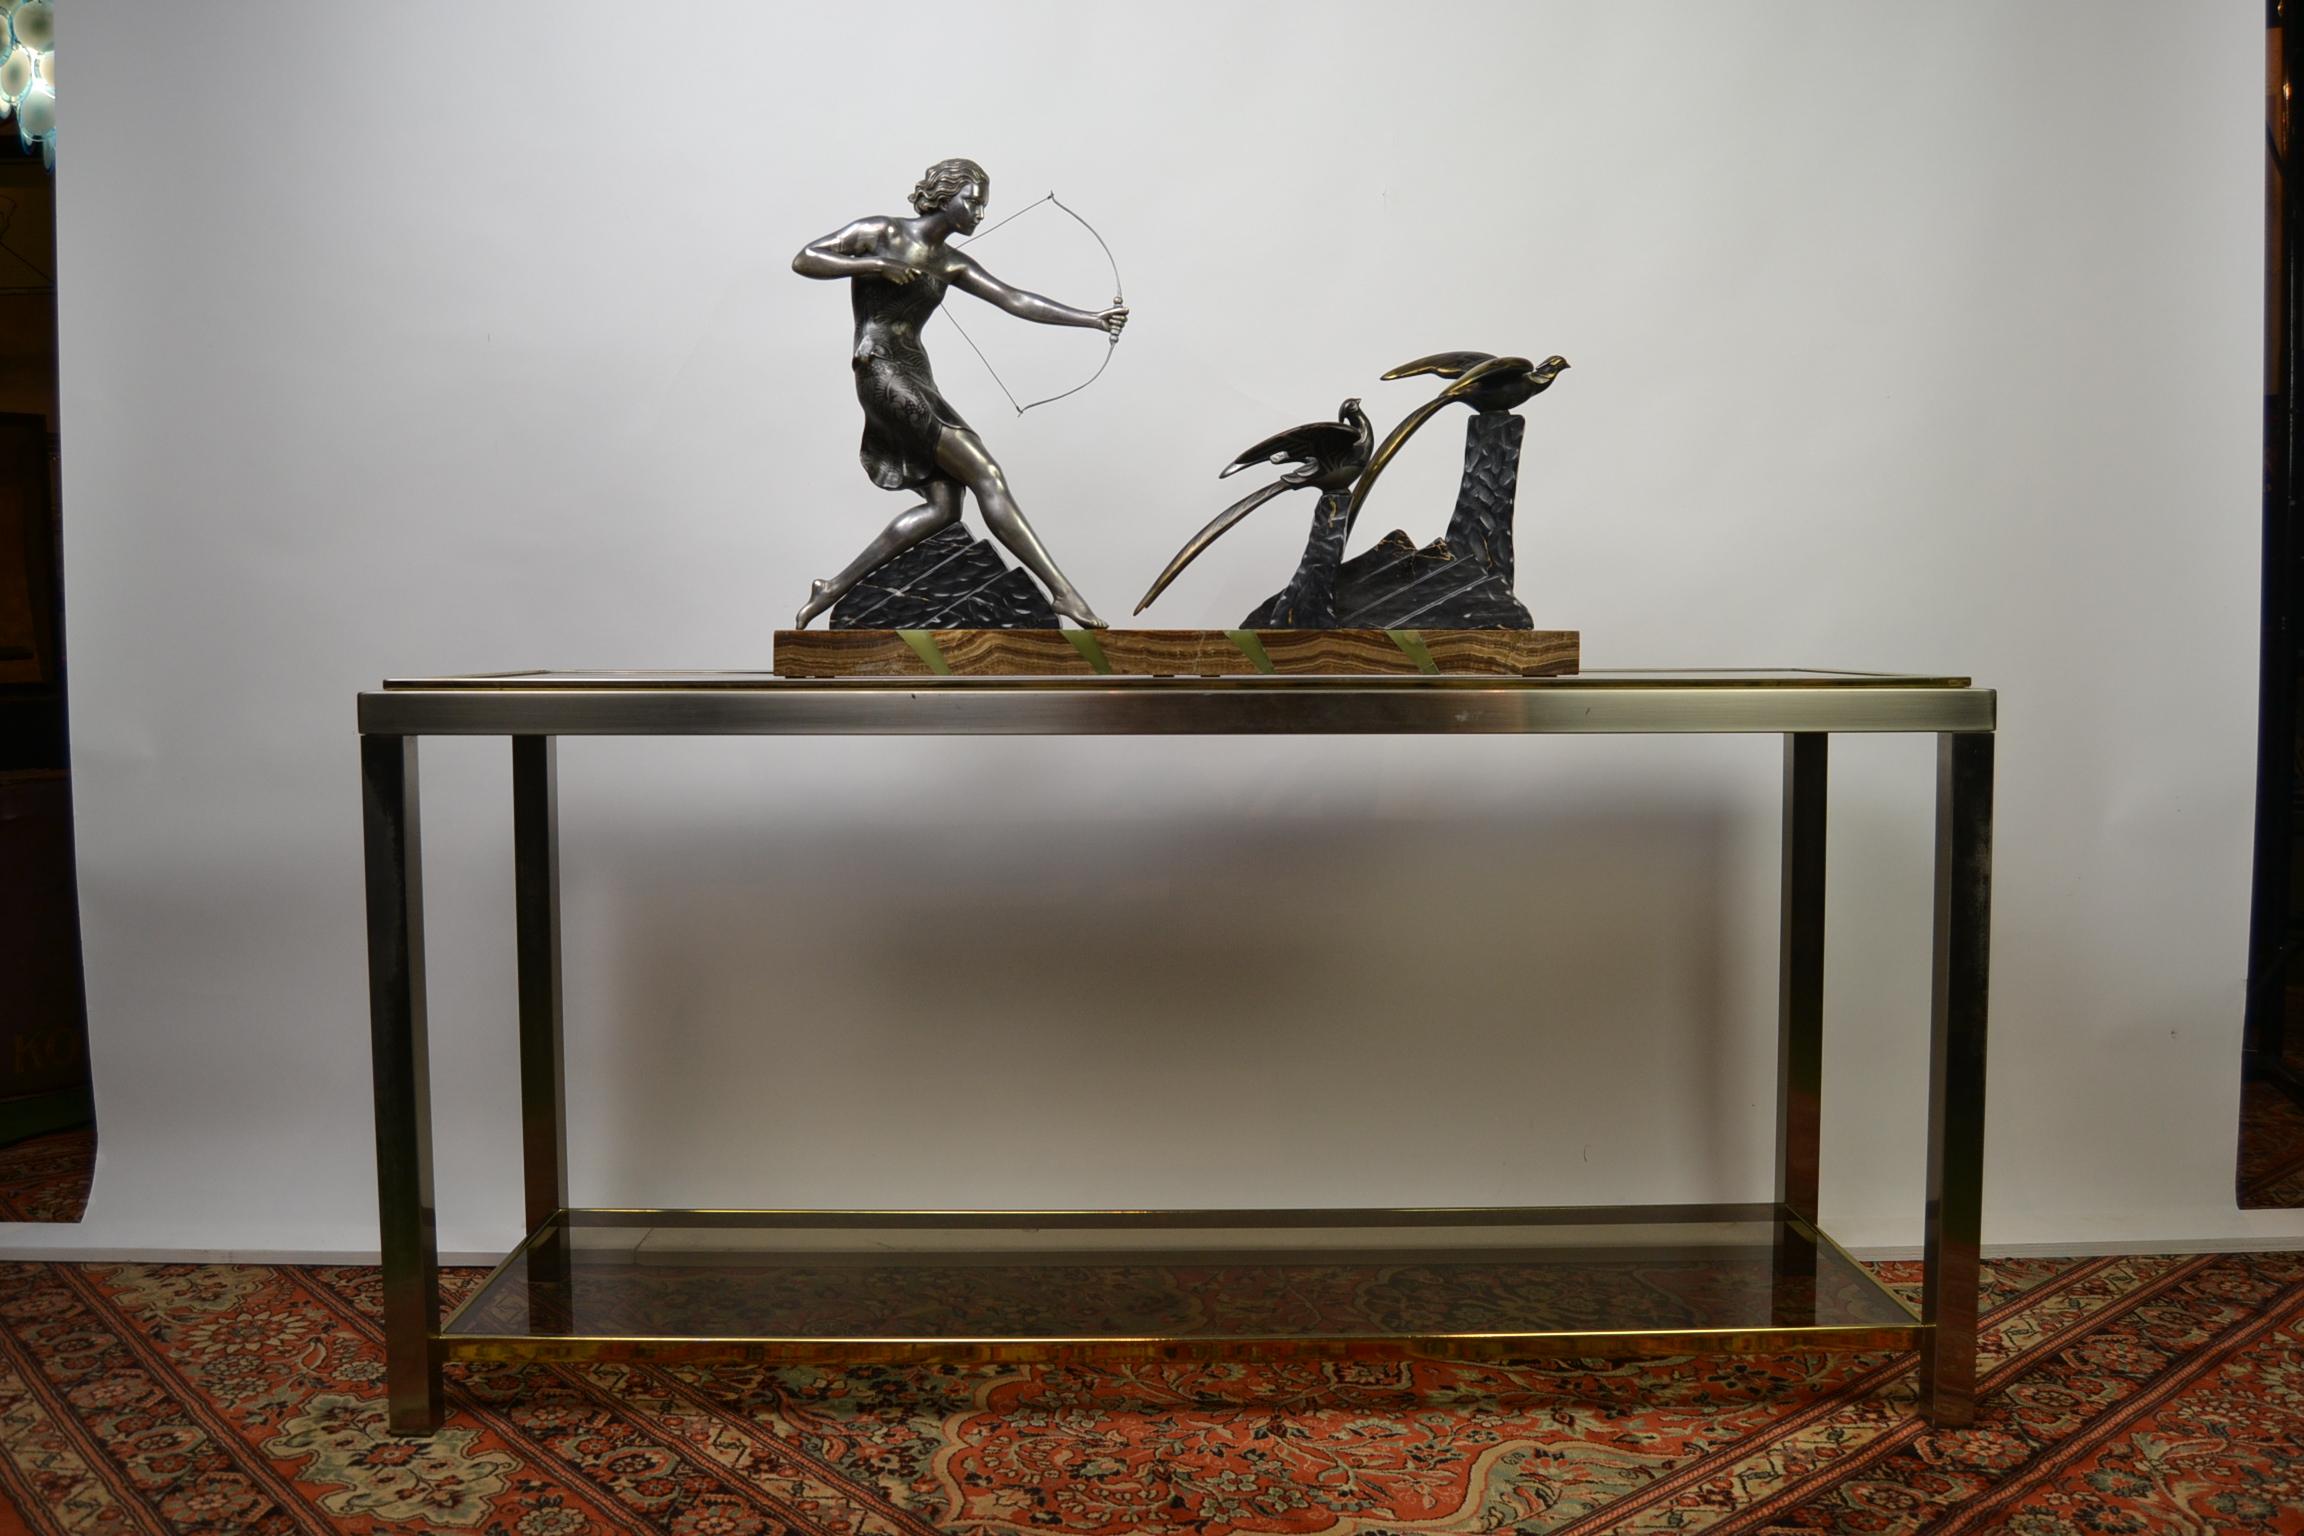 Impressive large Art Deco sculpture made and signed by Uriano.
Uriano was an Italian artist who worked in France. (1887-1960)
This piece of art dates from the 1920s-1930s: A huntress shooting two birds.
The lady and birds are made from Spelter,